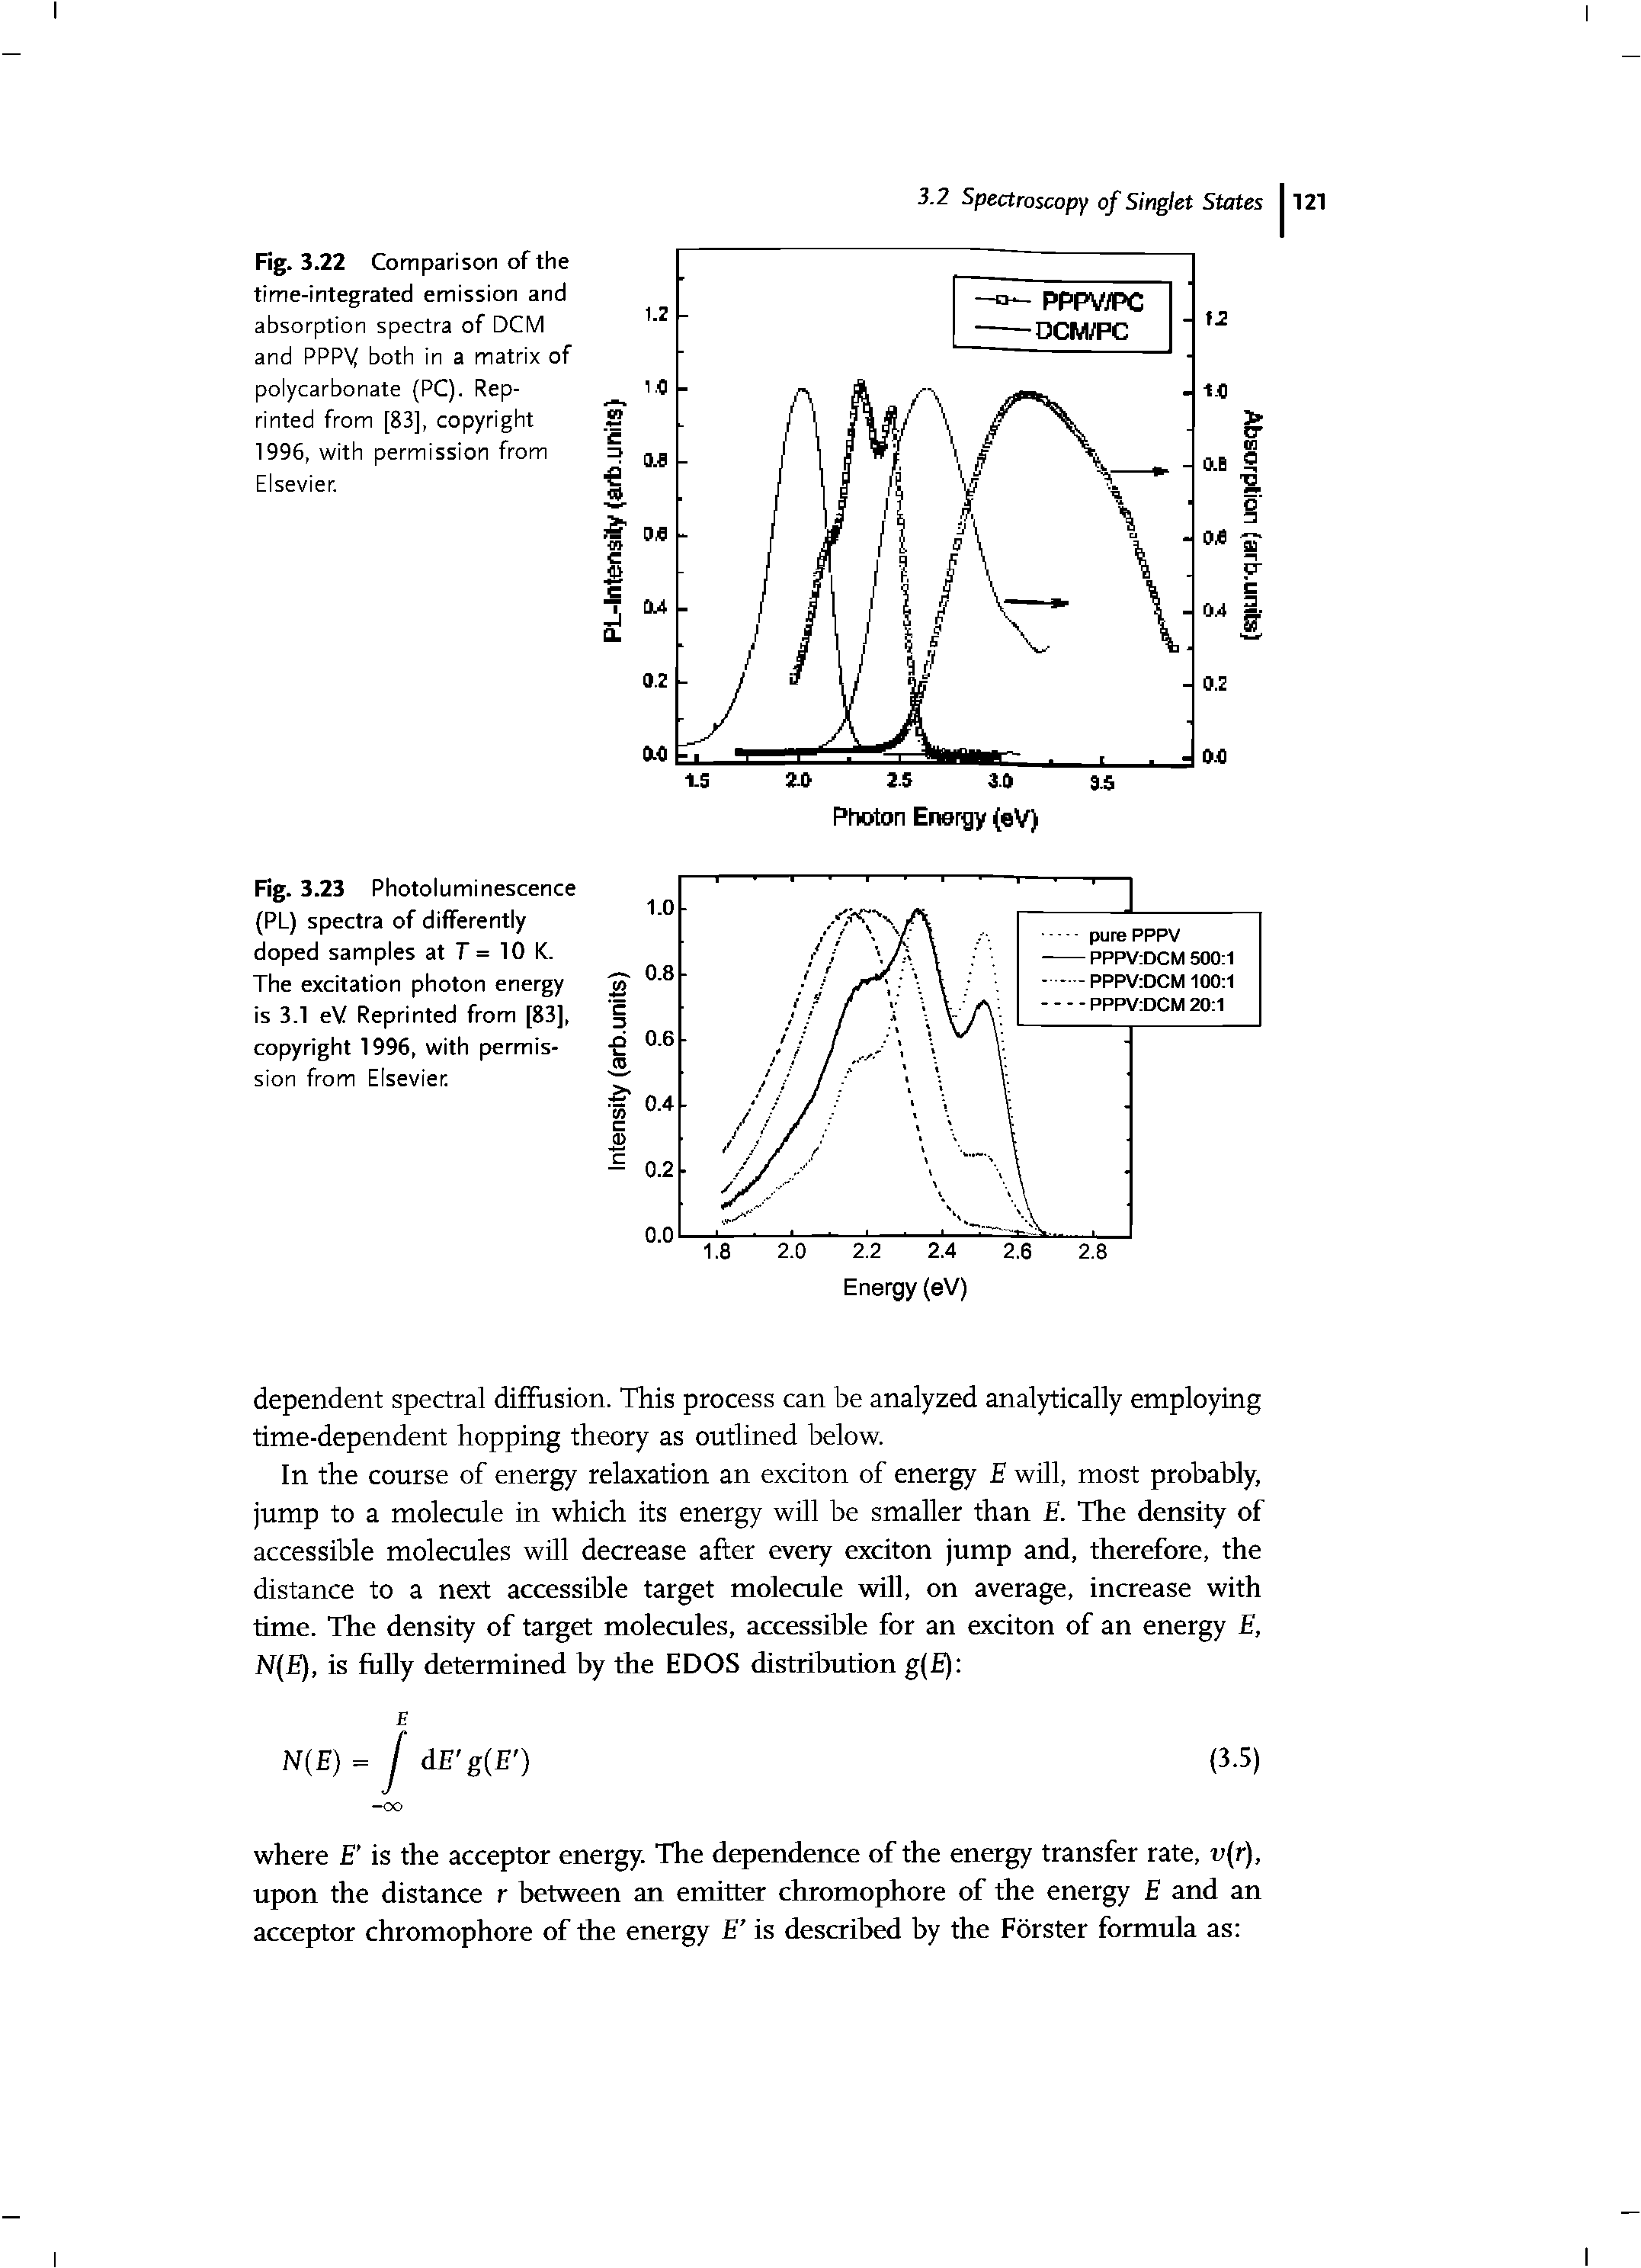 Fig. 3.23 Photoluminescence (PL) spectra of differently doped samples at T = 10 K. The excitation photon energy is 3.1 eV Reprinted from [83], copyright 1996, with permission from Elsevier...